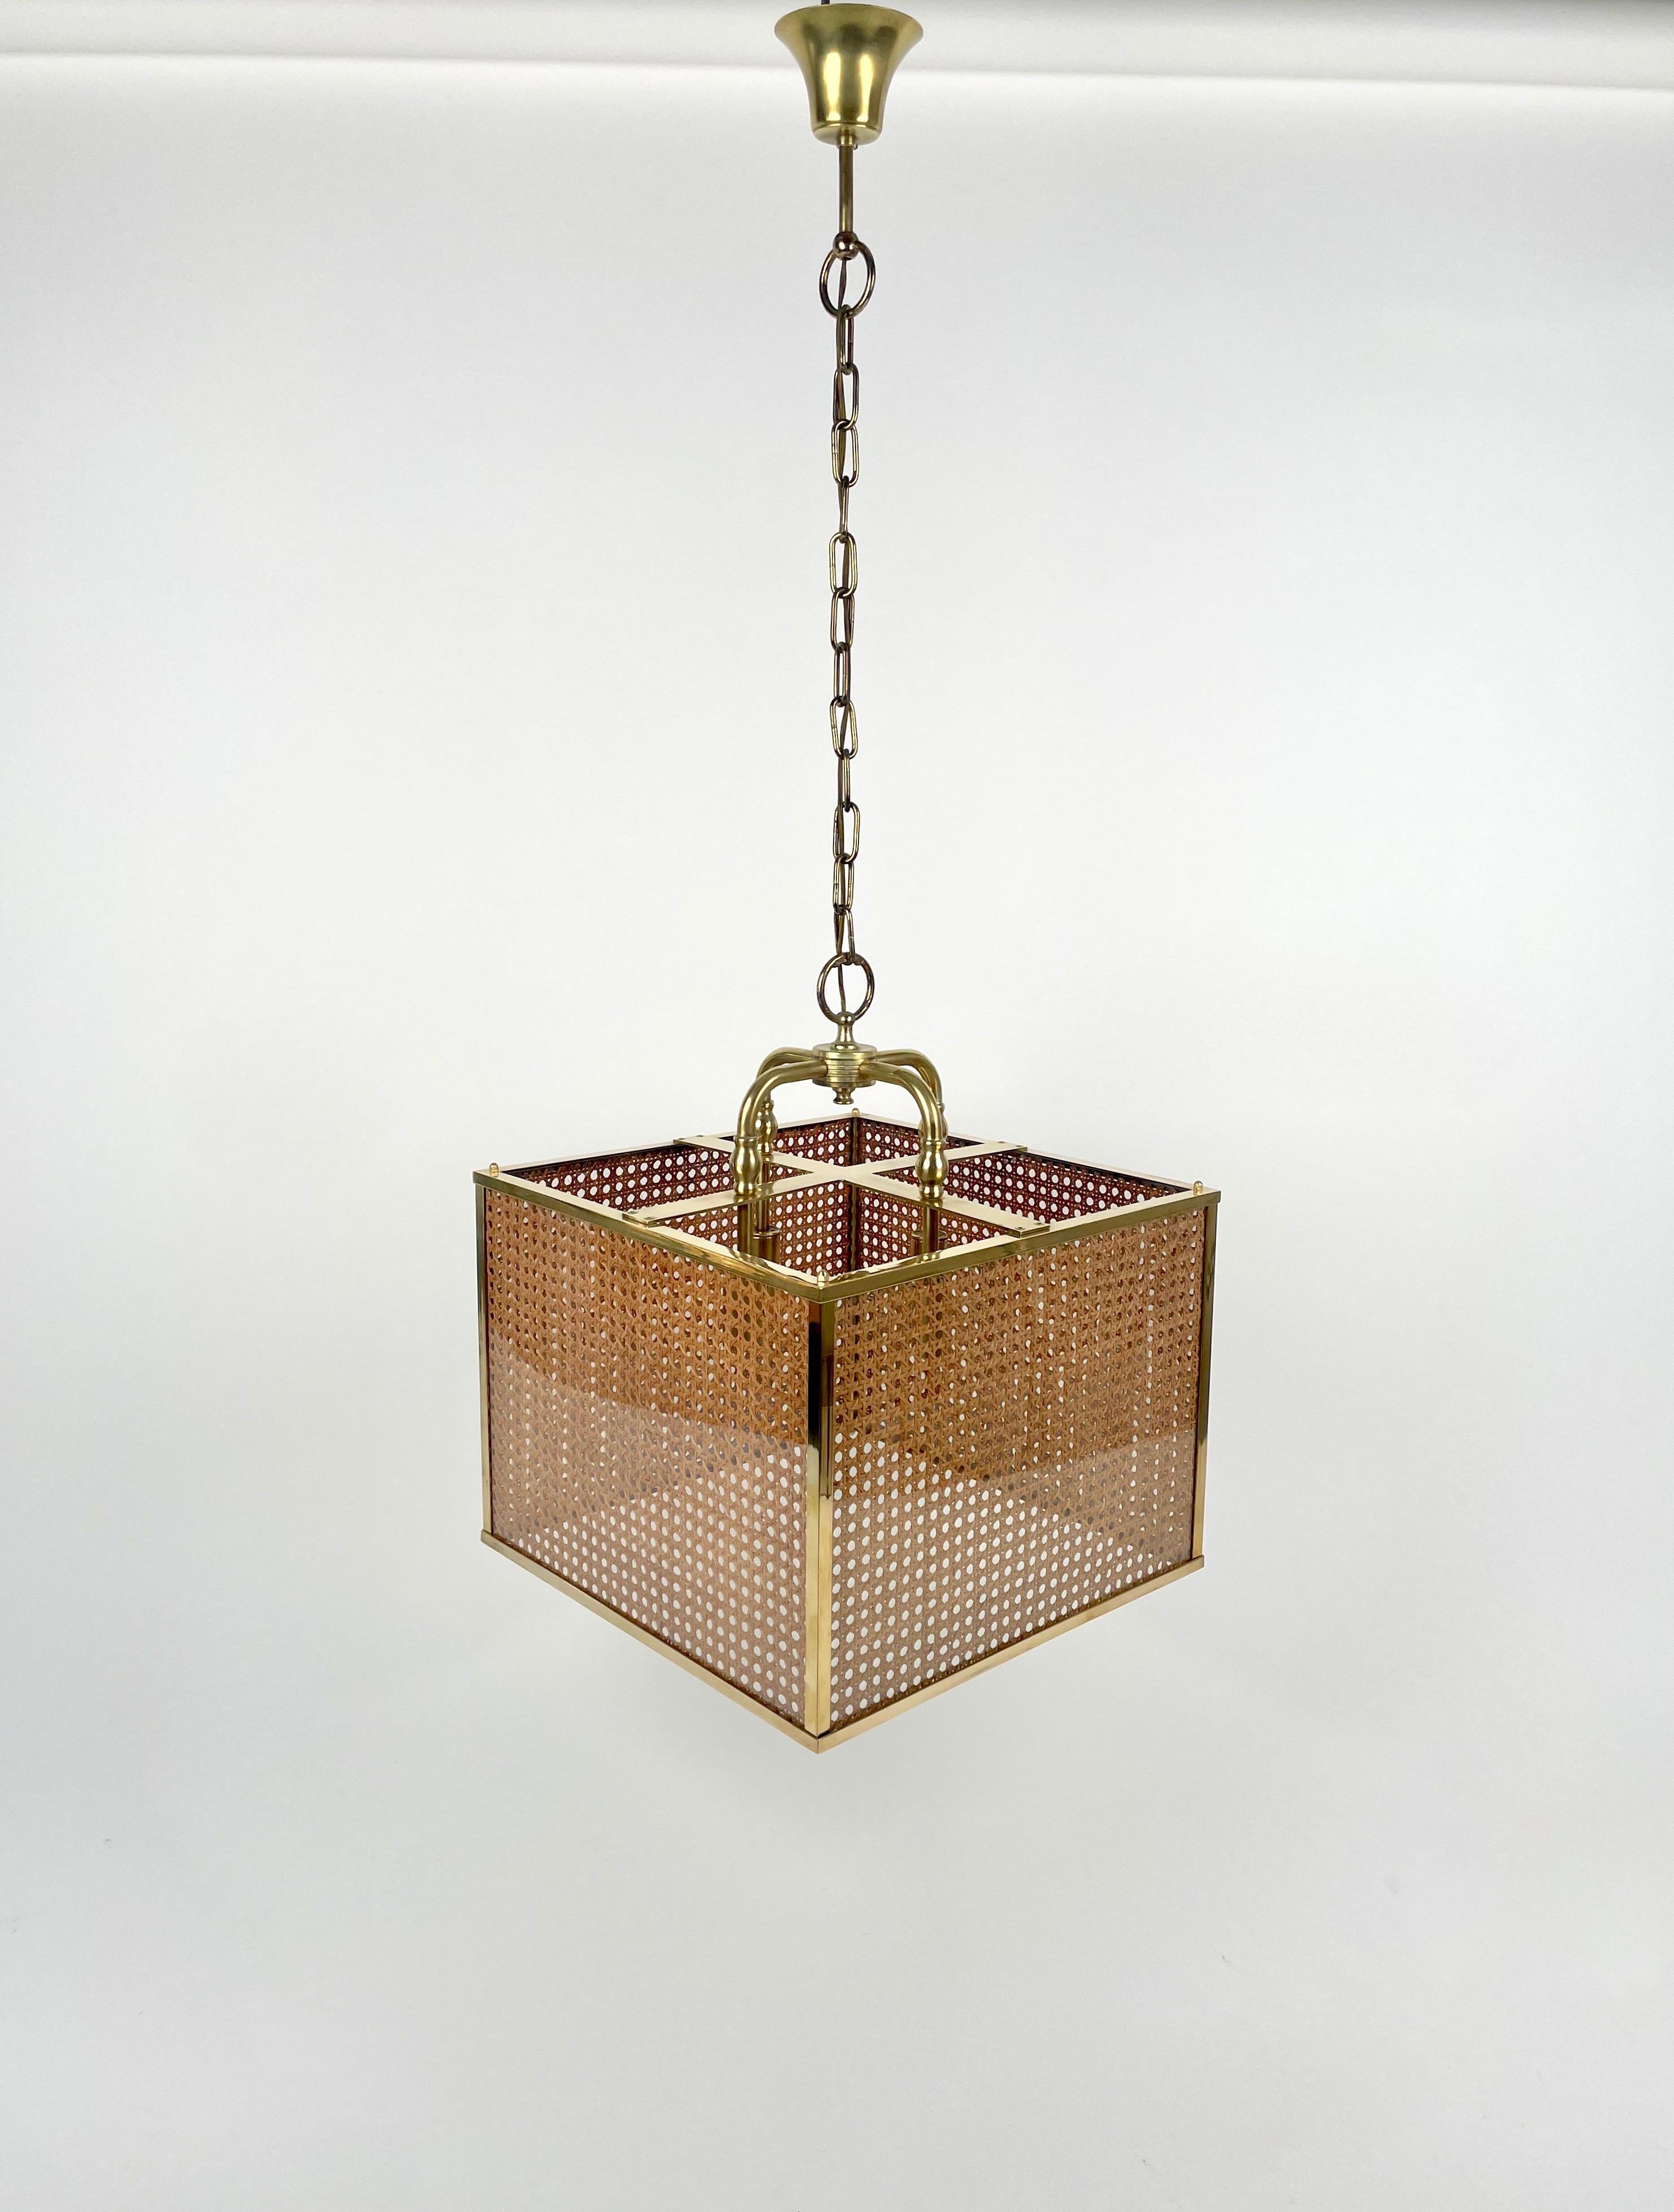 Late 20th Century Rattan, Brass and Glass Chandelier Four-Light, Italy 1970s For Sale